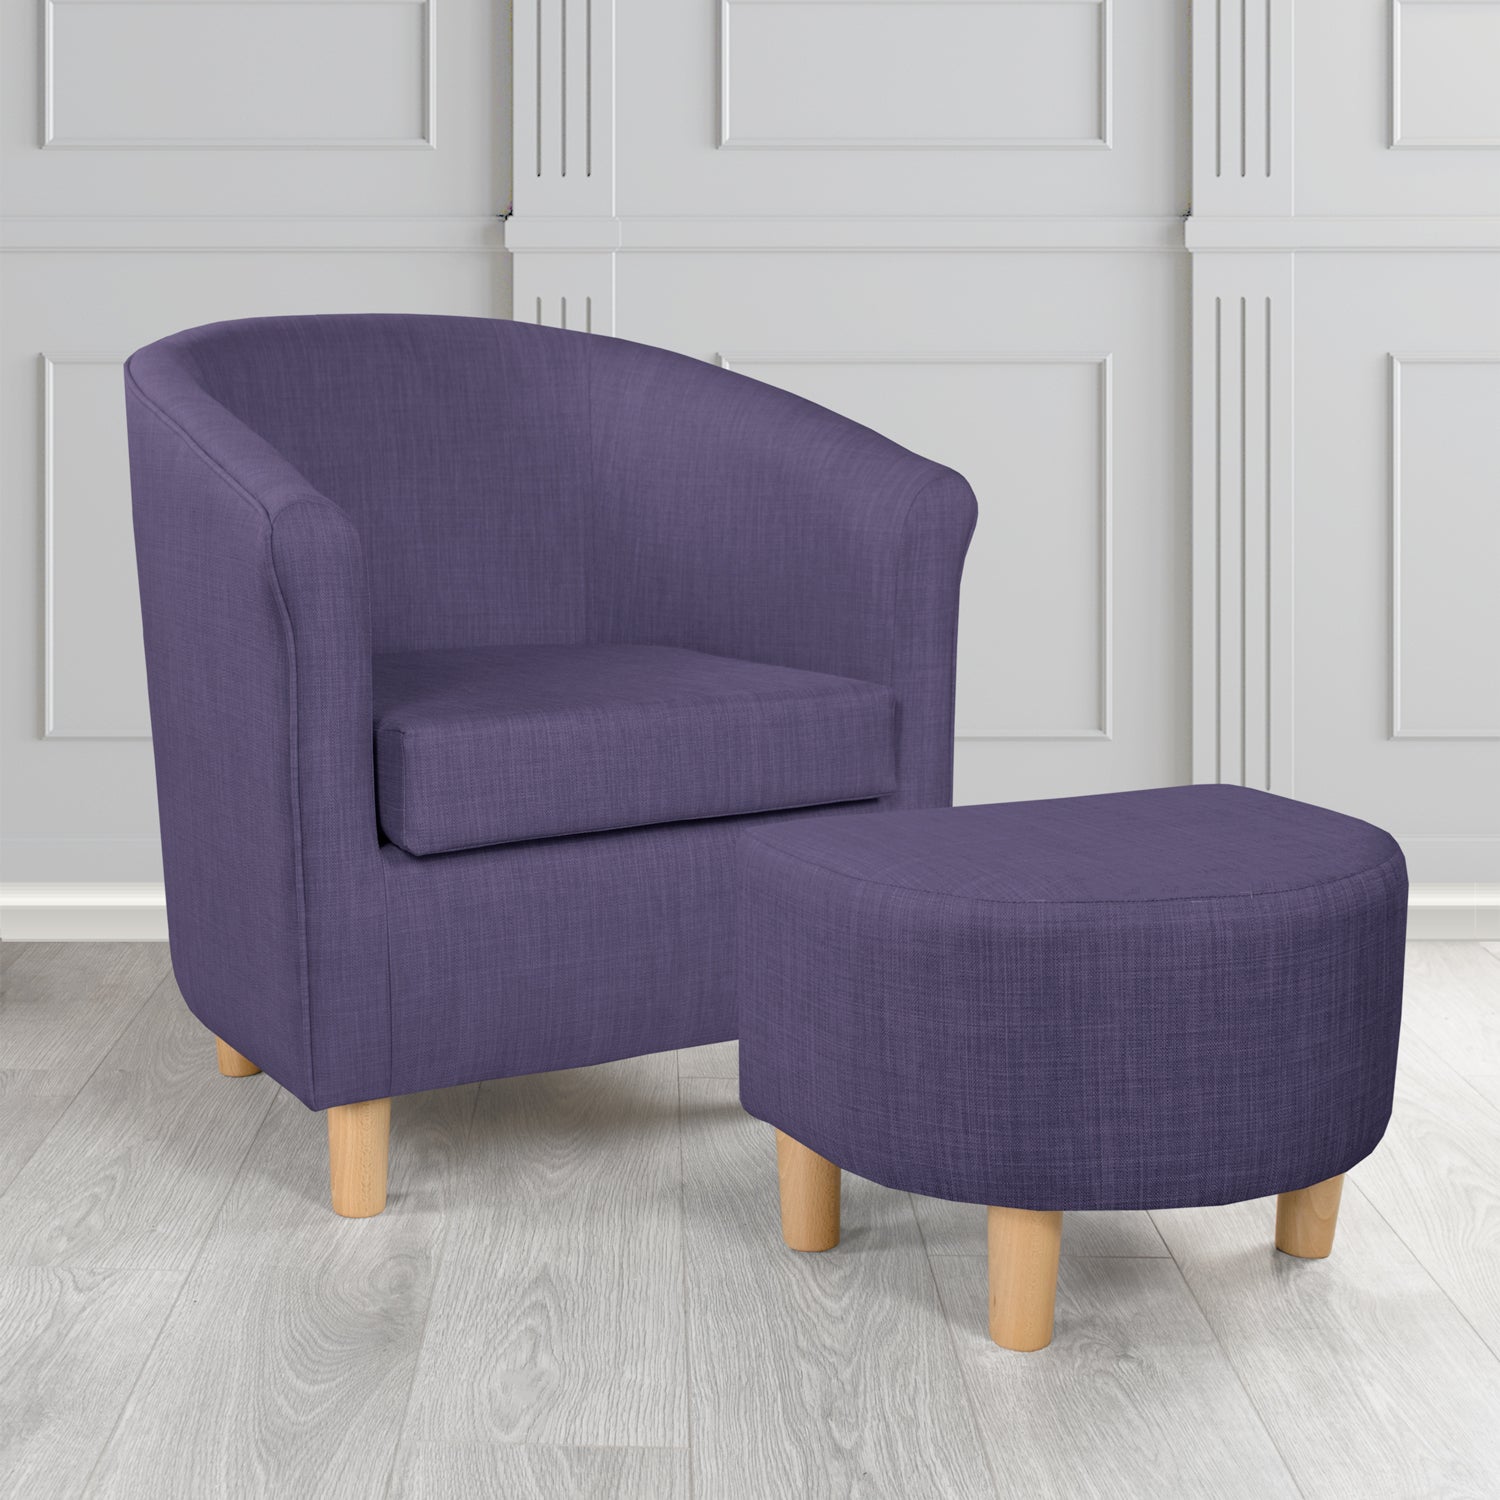 Tuscany Charles Purple Linen Plain Fabric Tub Chair with Dee Footstool Set - The Tub Chair Shop